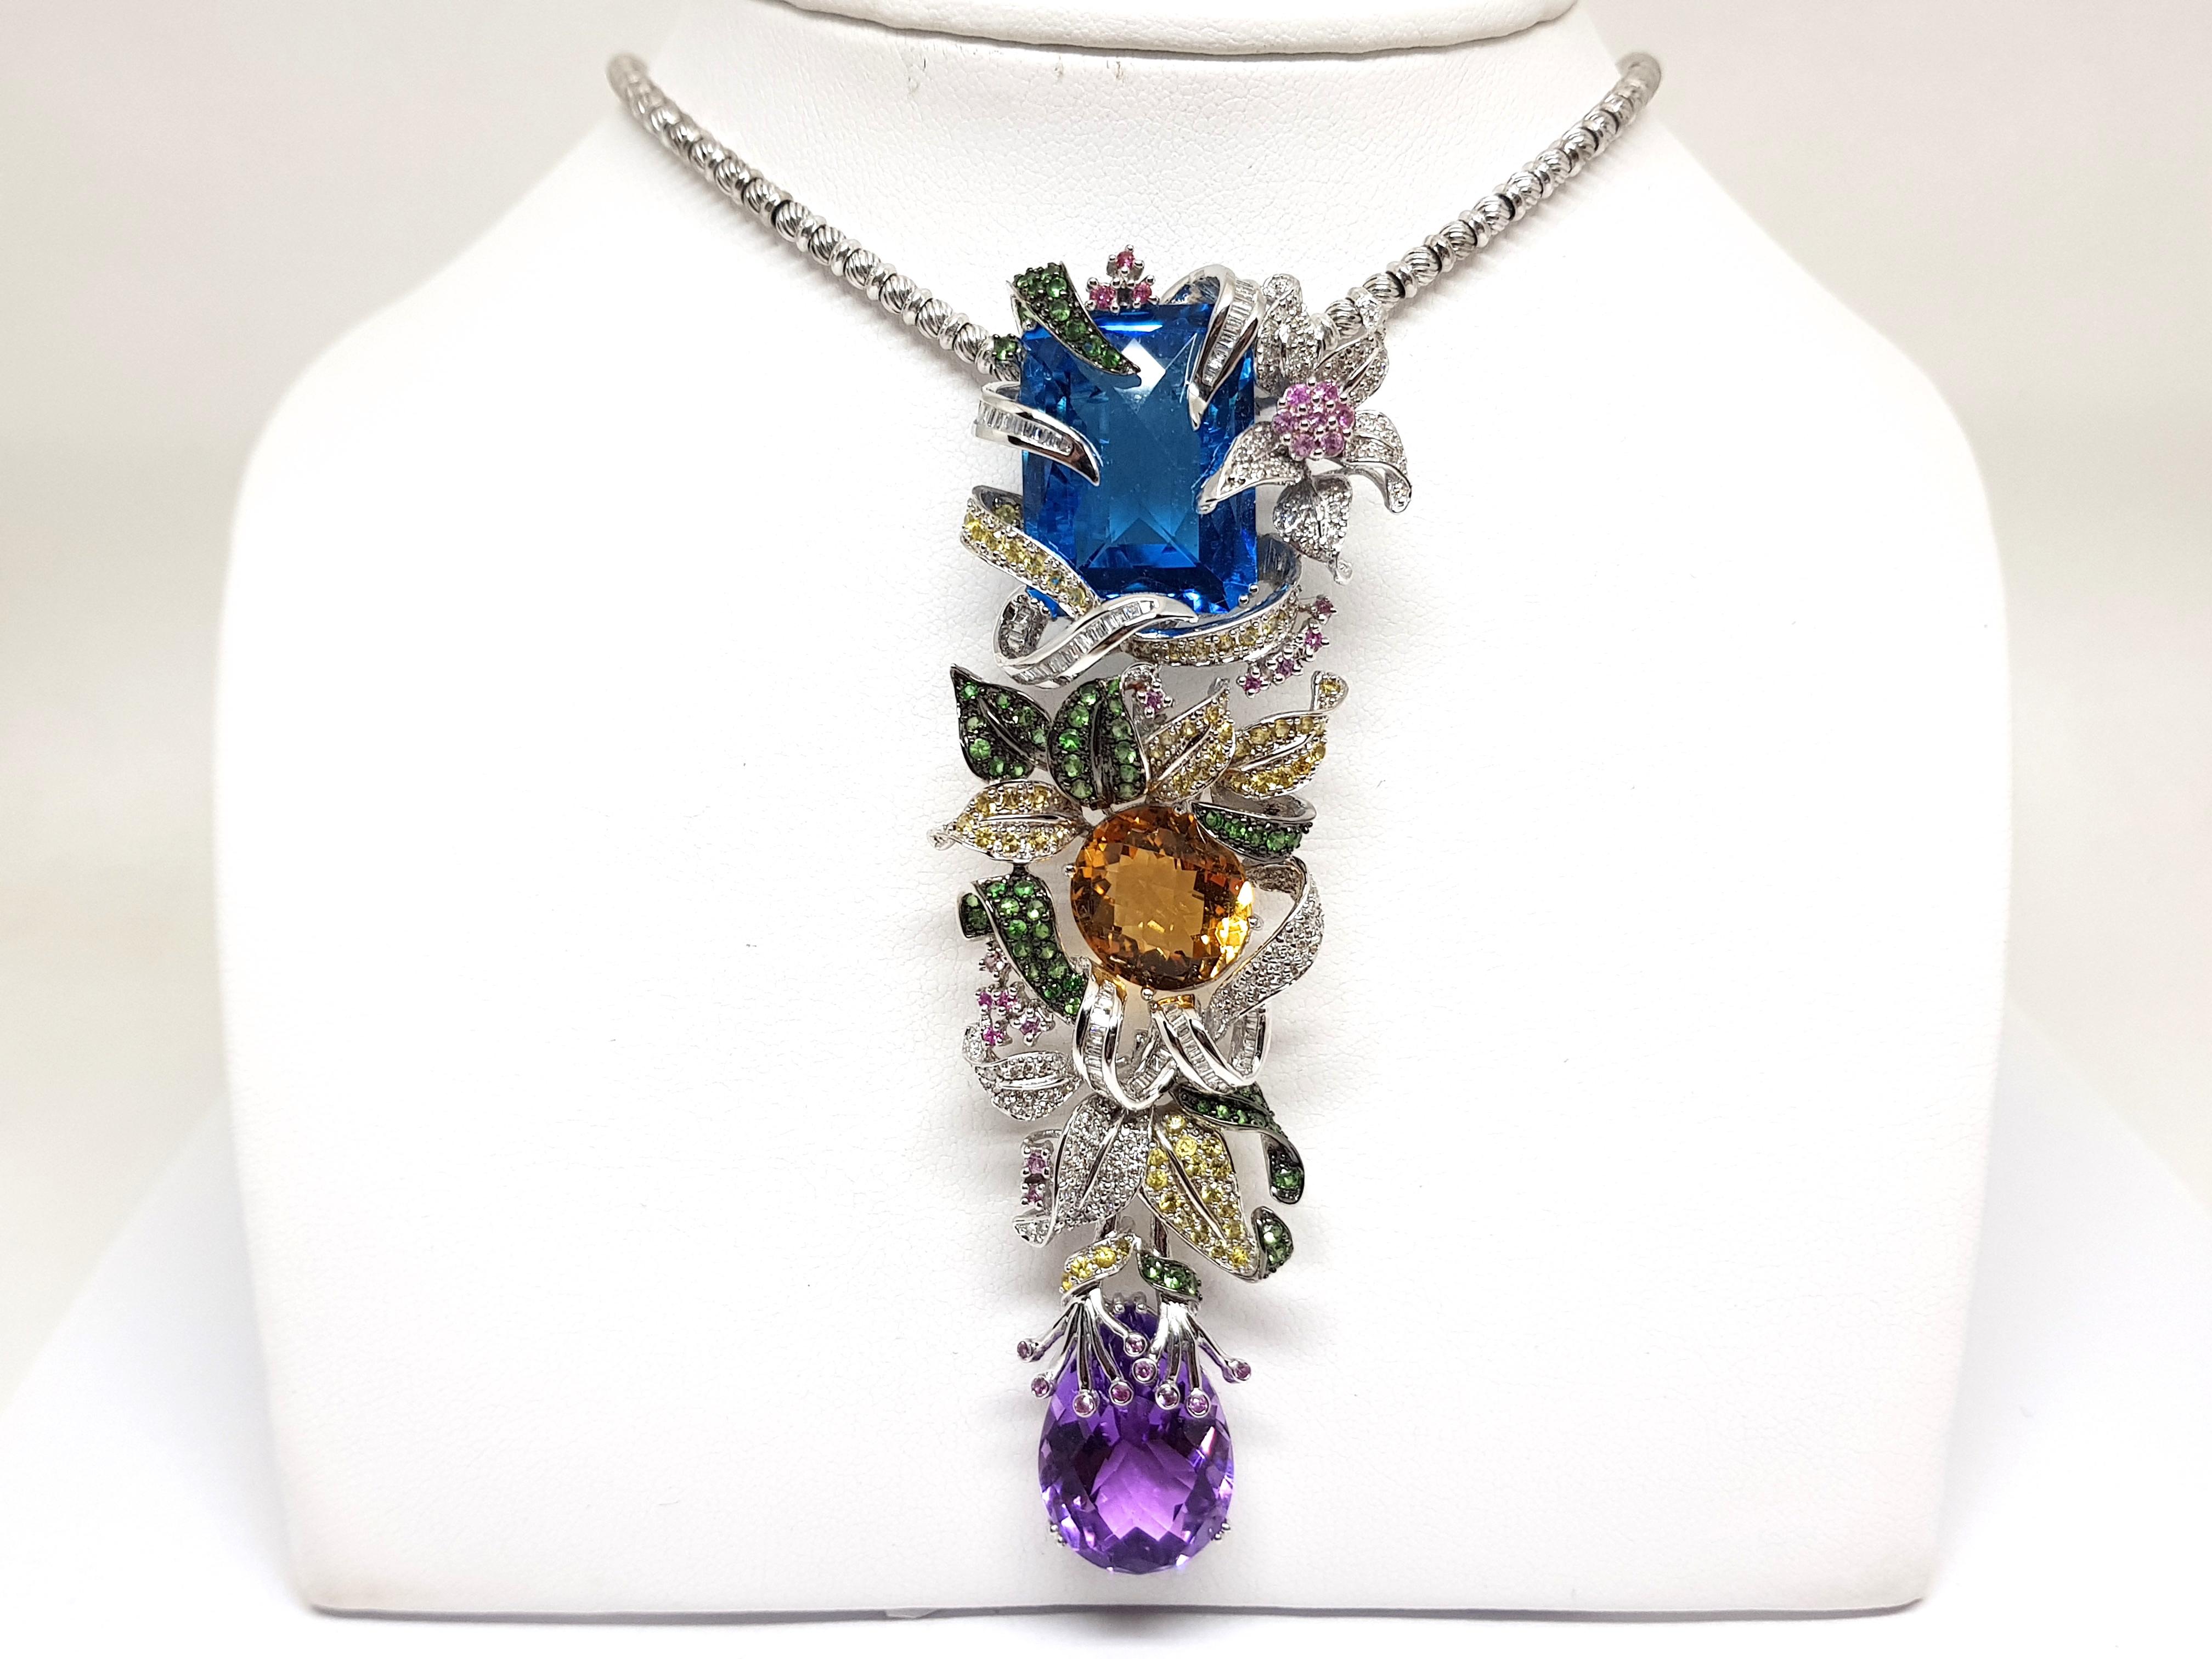 Gold: 18K White Gold. 
Weight: 42.84 gr. 
Diamonds: 5.59ct. Colour: G Clarity: VS 
Topaz: 16.10ct. 
Citrine: 5.11ct. 
Amethyst: 6.96ct. 
Emeralds: 1.70ct. 
Yellow Sapphires: 1.68ct. 
Pink Sapphires: 0.66ct. 
Length Pendant: 9.7 cm. 
Width Pendant: